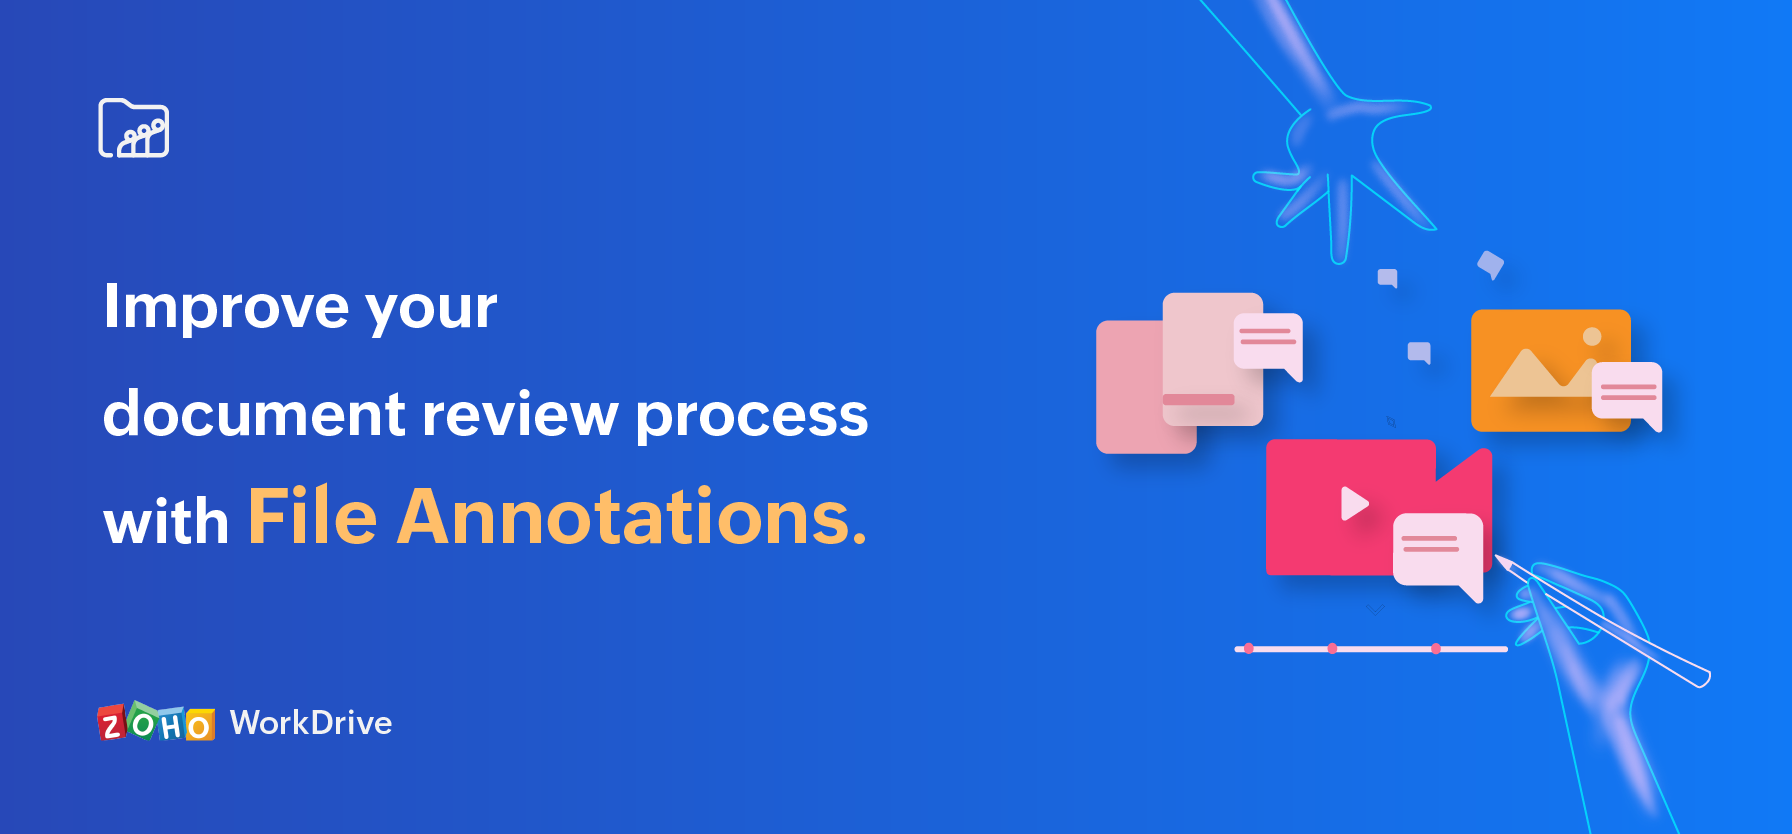 Improve your document review process with File Annotations.